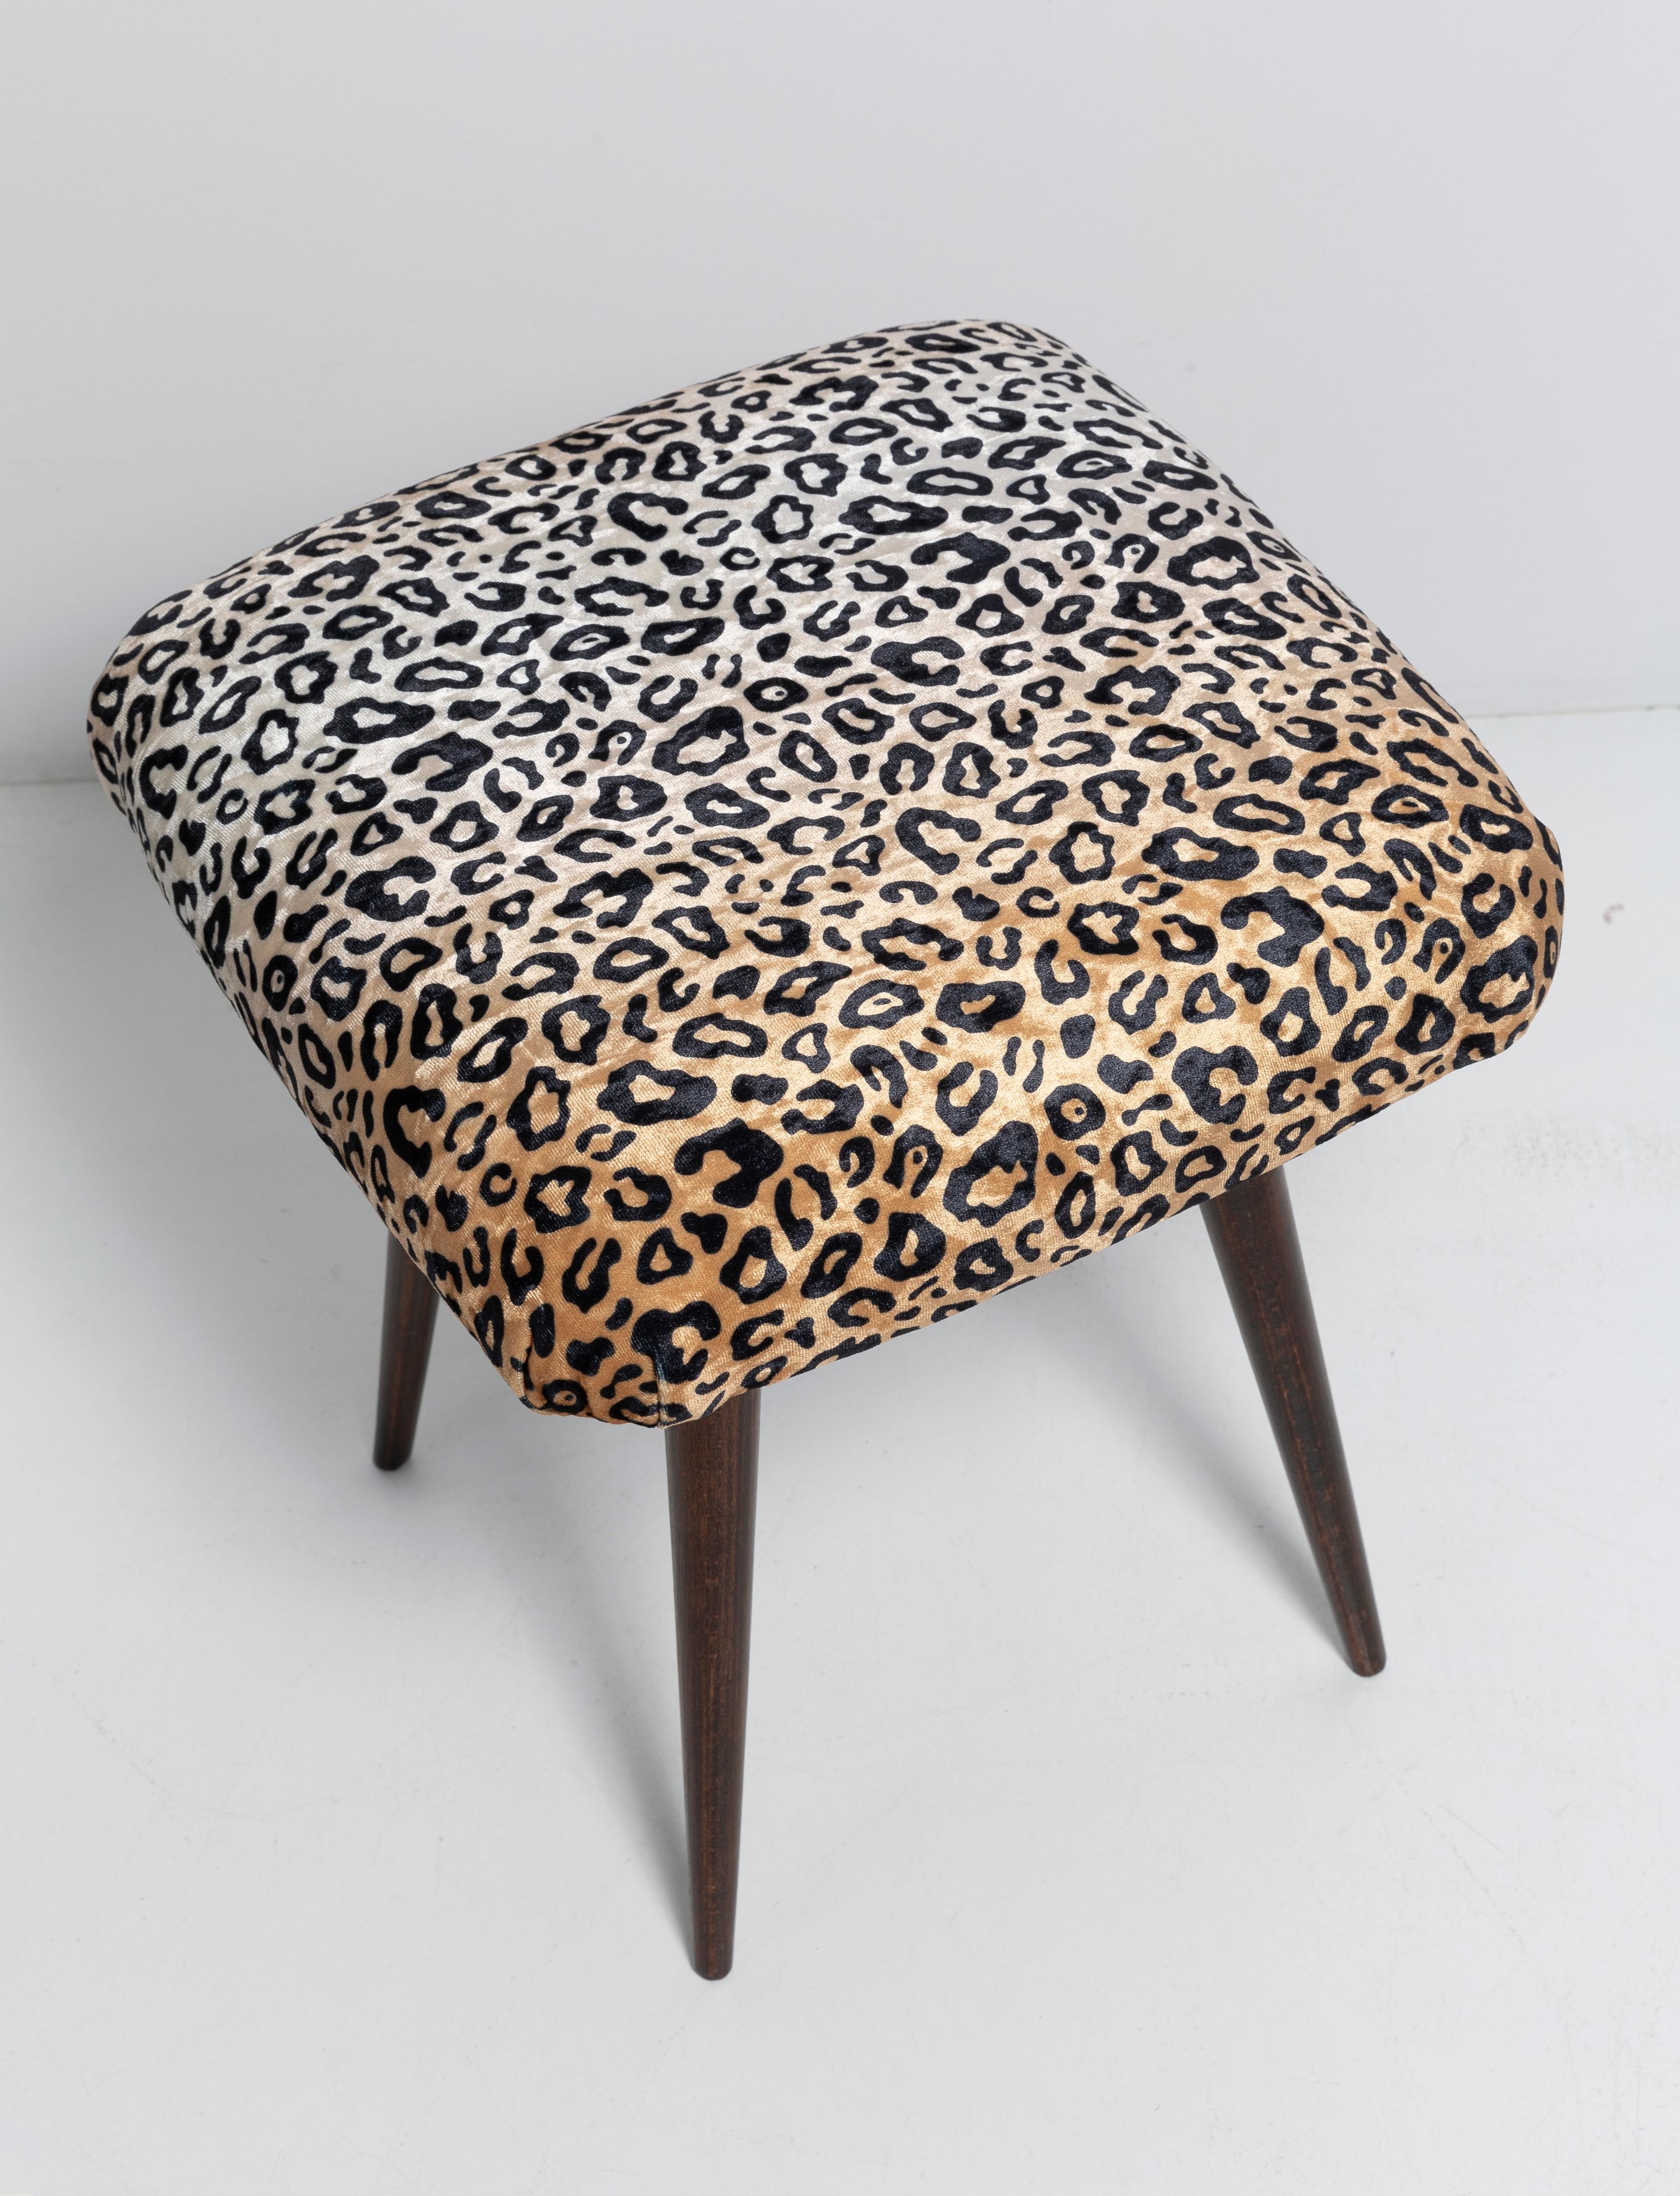 Hand-Crafted Pair of 20th Century Leopard Velvet Vintage Stools, Europe, 1960s For Sale